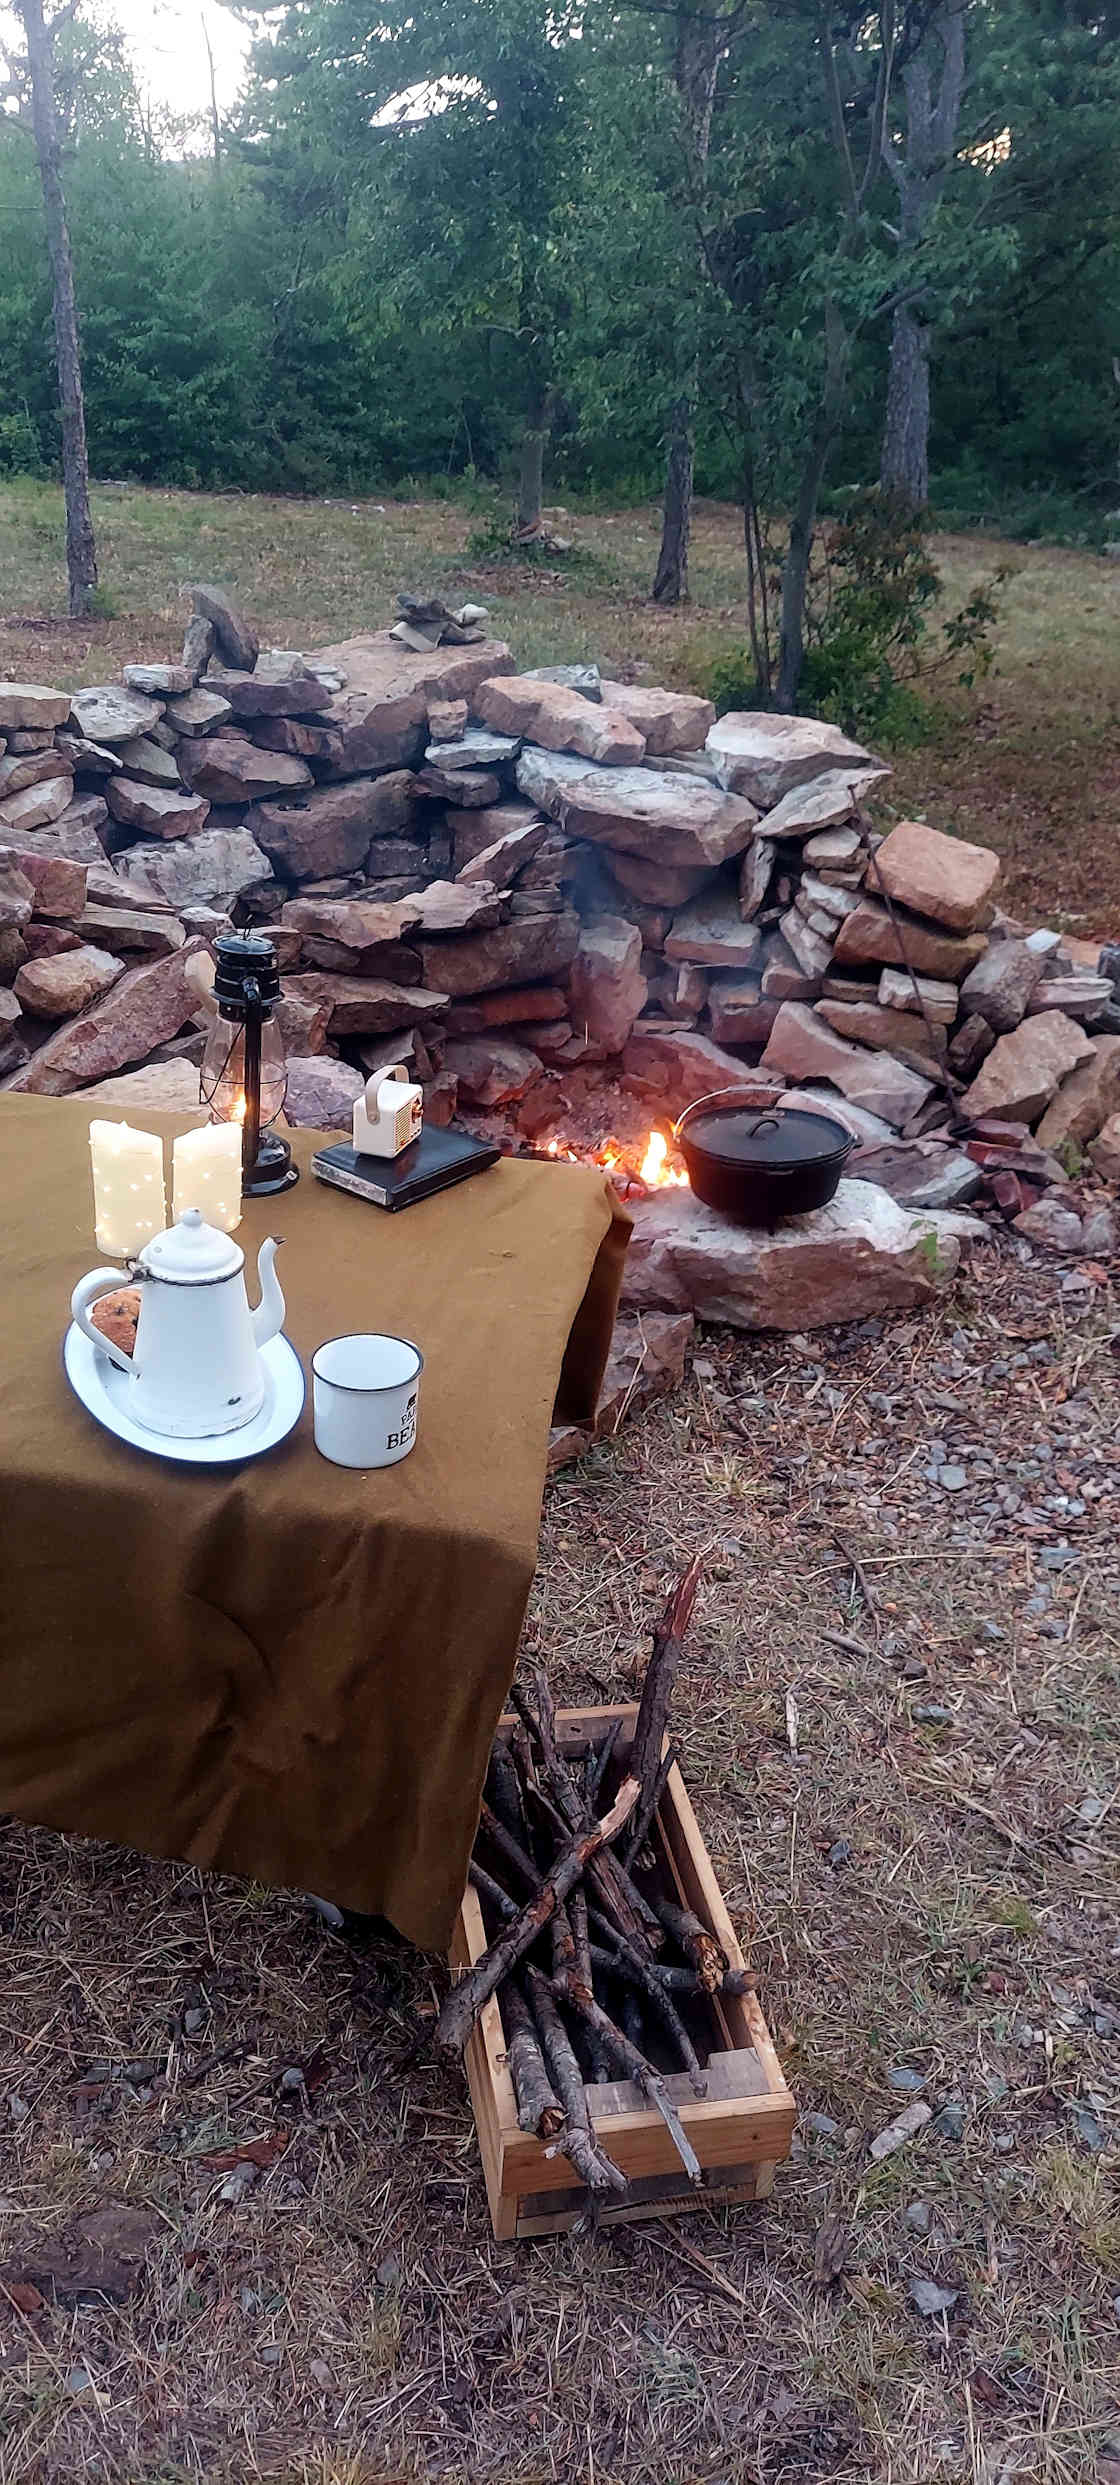 Coffee and muffin by the fire for an early breakfast at Campsite 1.